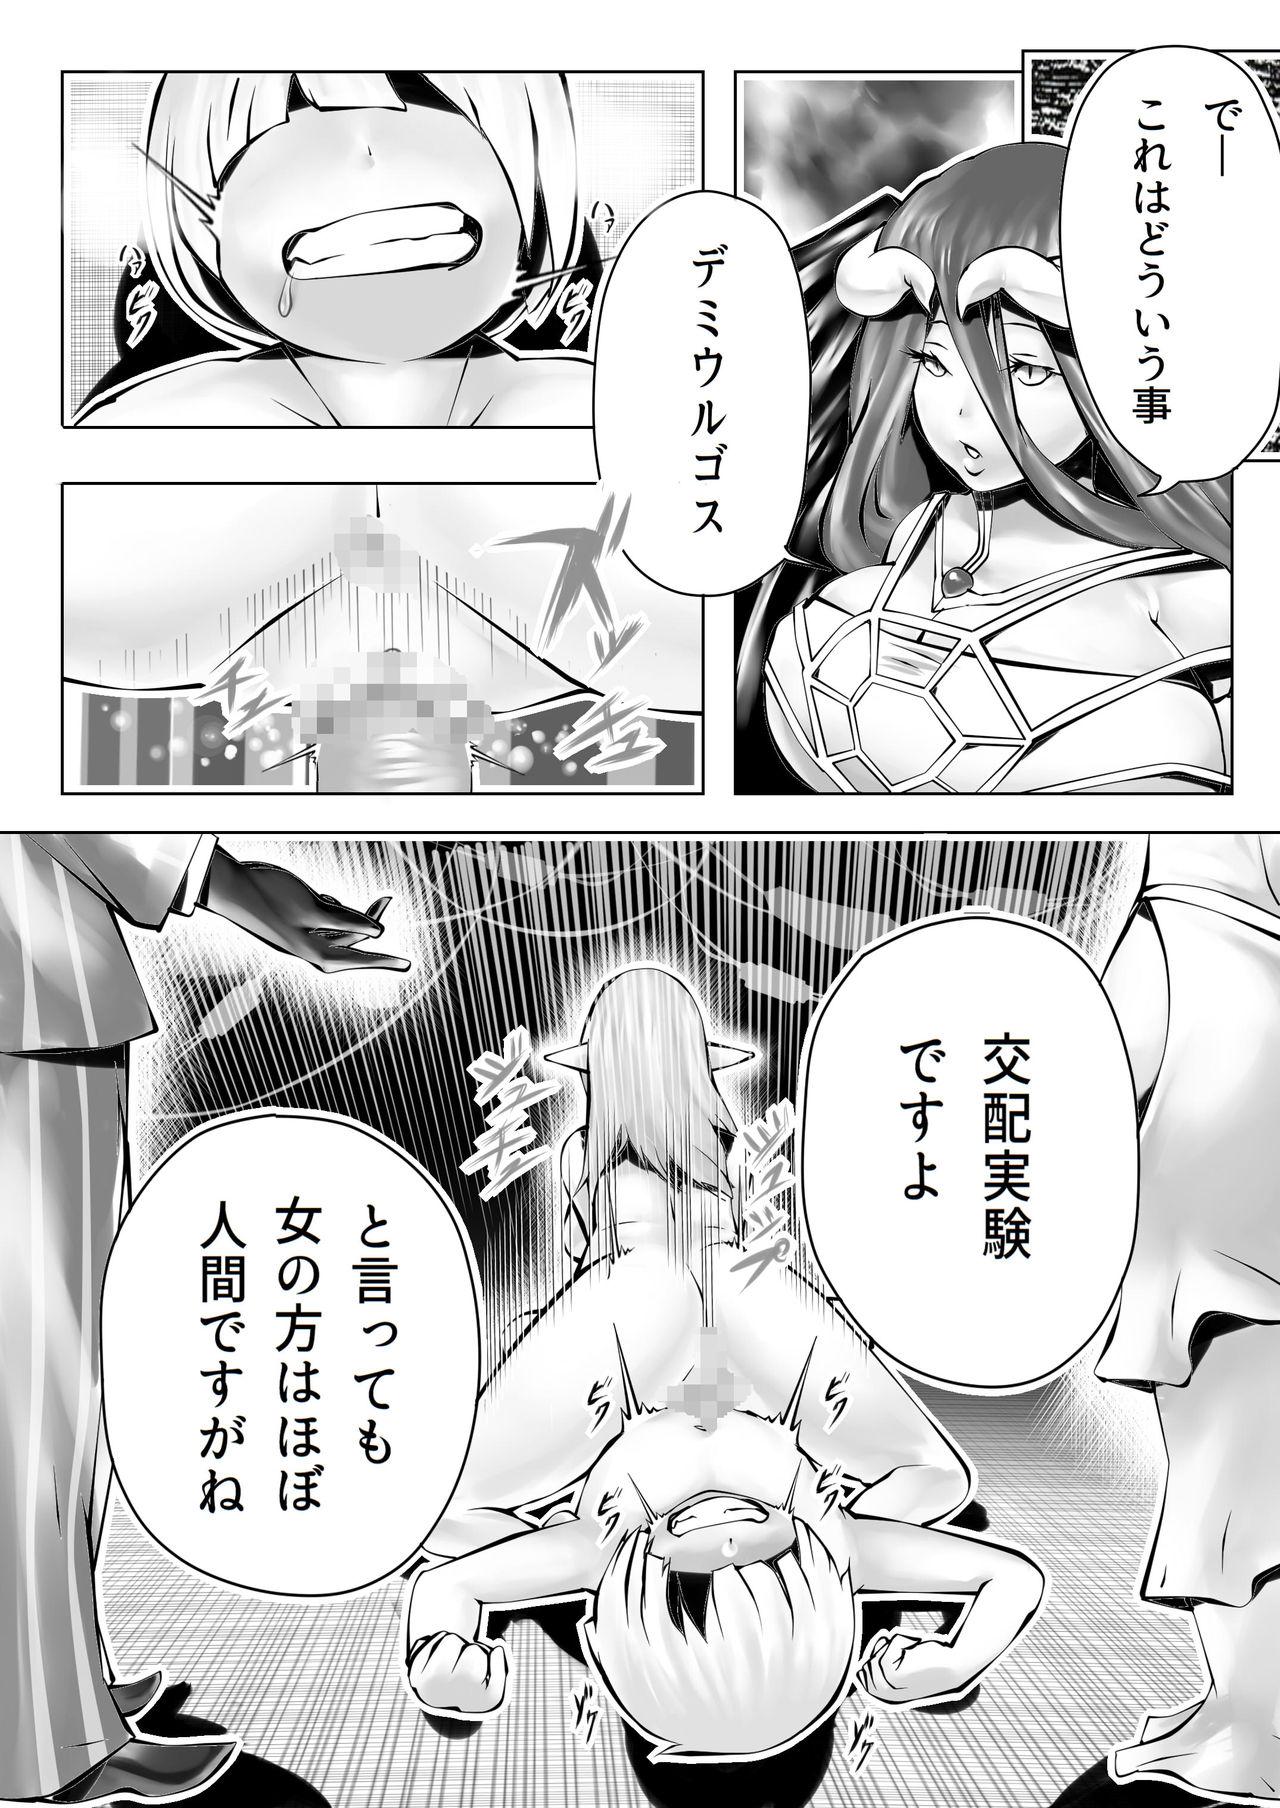 Soapy Nfirea x Albedo - Overlord Guyonshemale - Page 3